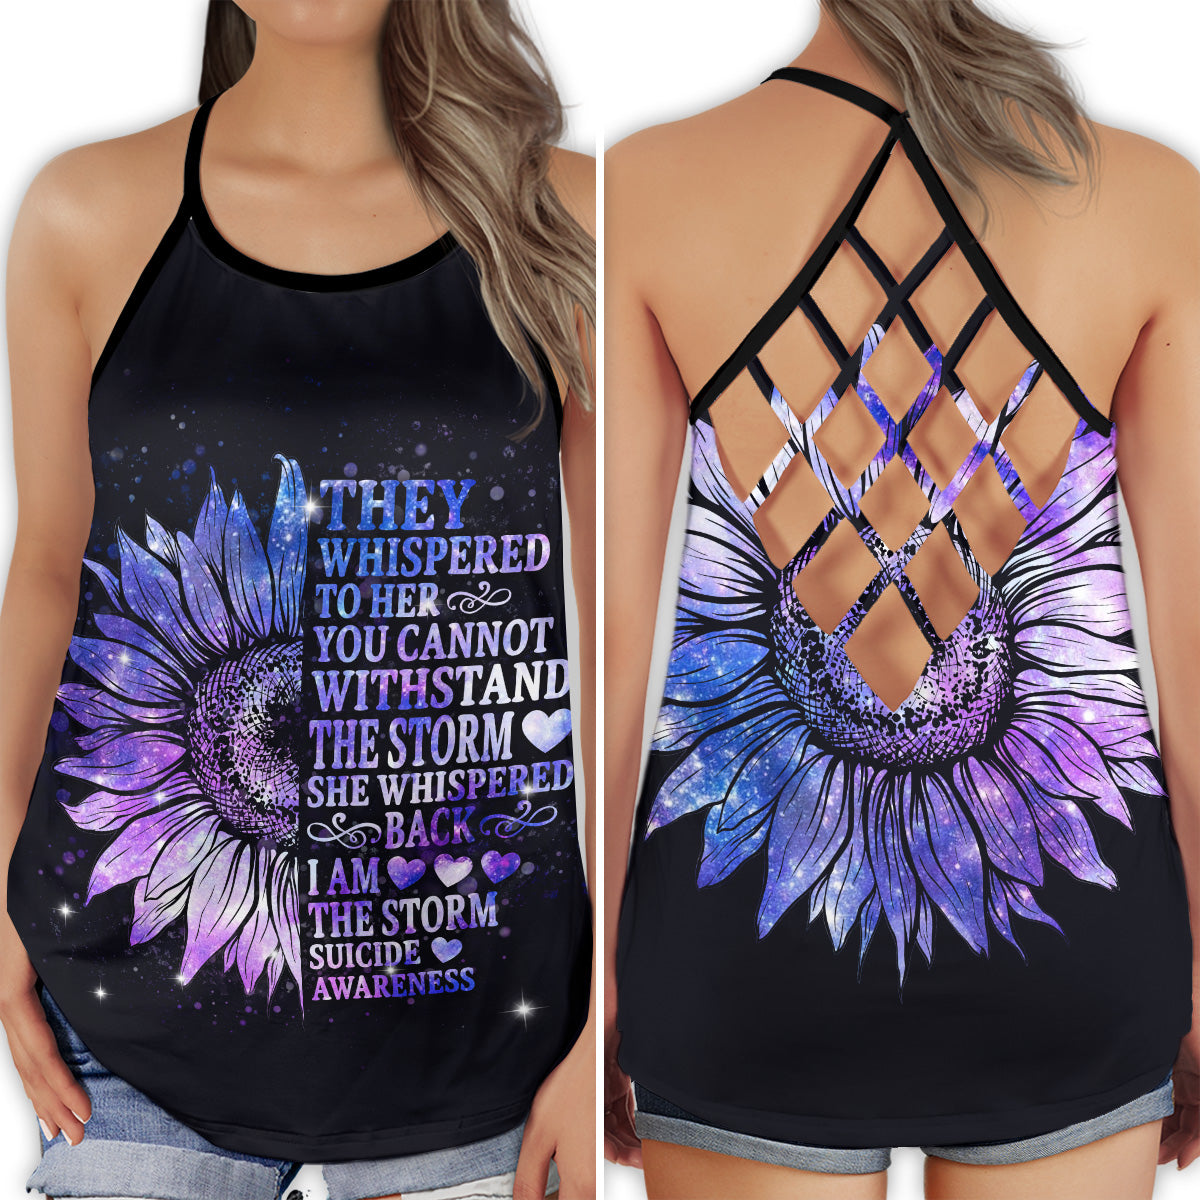 S Suicide Awareness They Whispered To Her - Cross Open Back Tank Top - Owls Matrix LTD